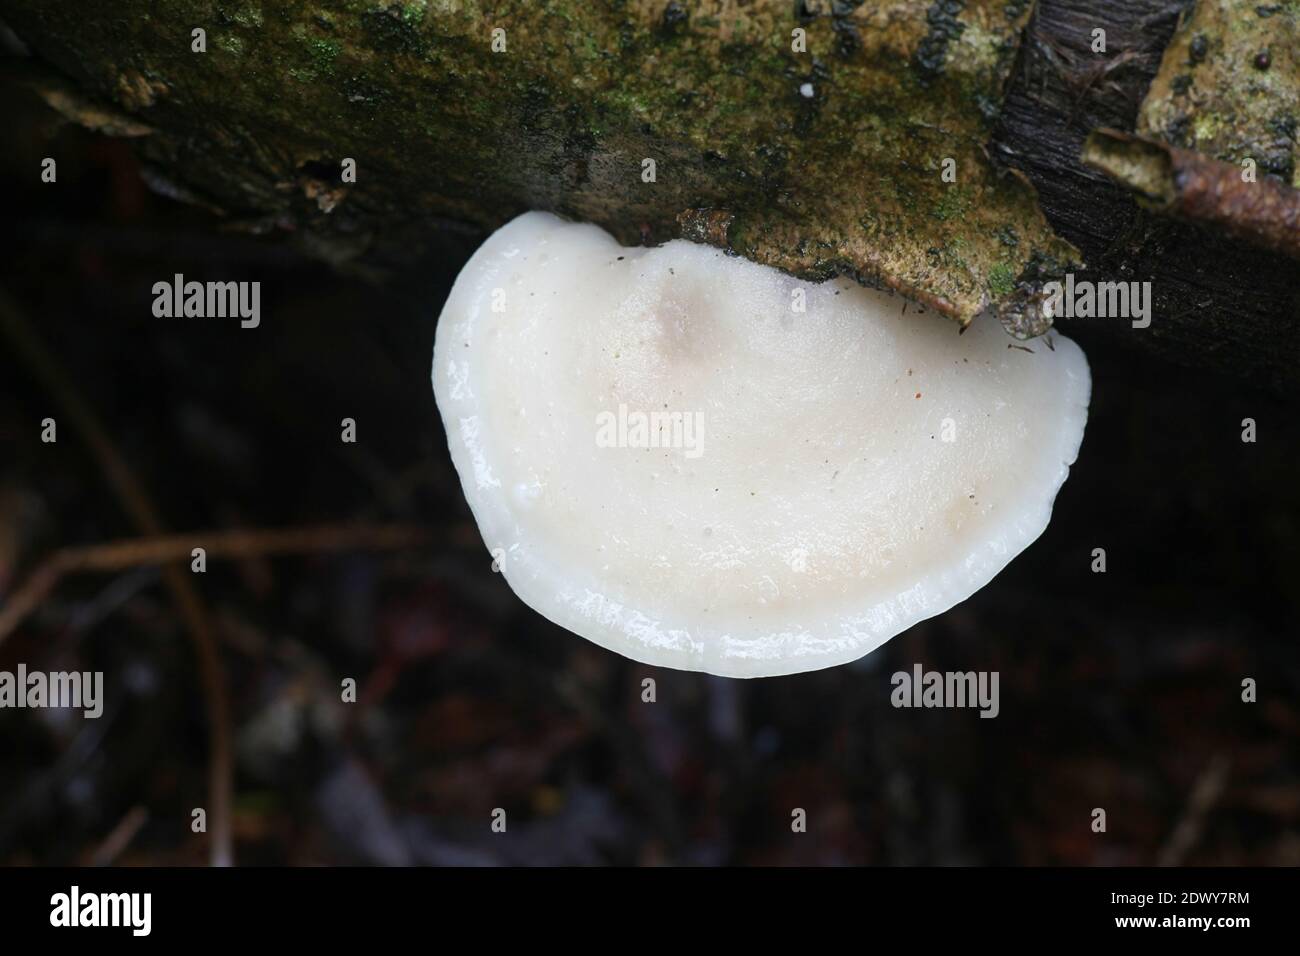 Tyromyces chioneus, known as white cheese polypore, bracket fungus from Finland Stock Photo